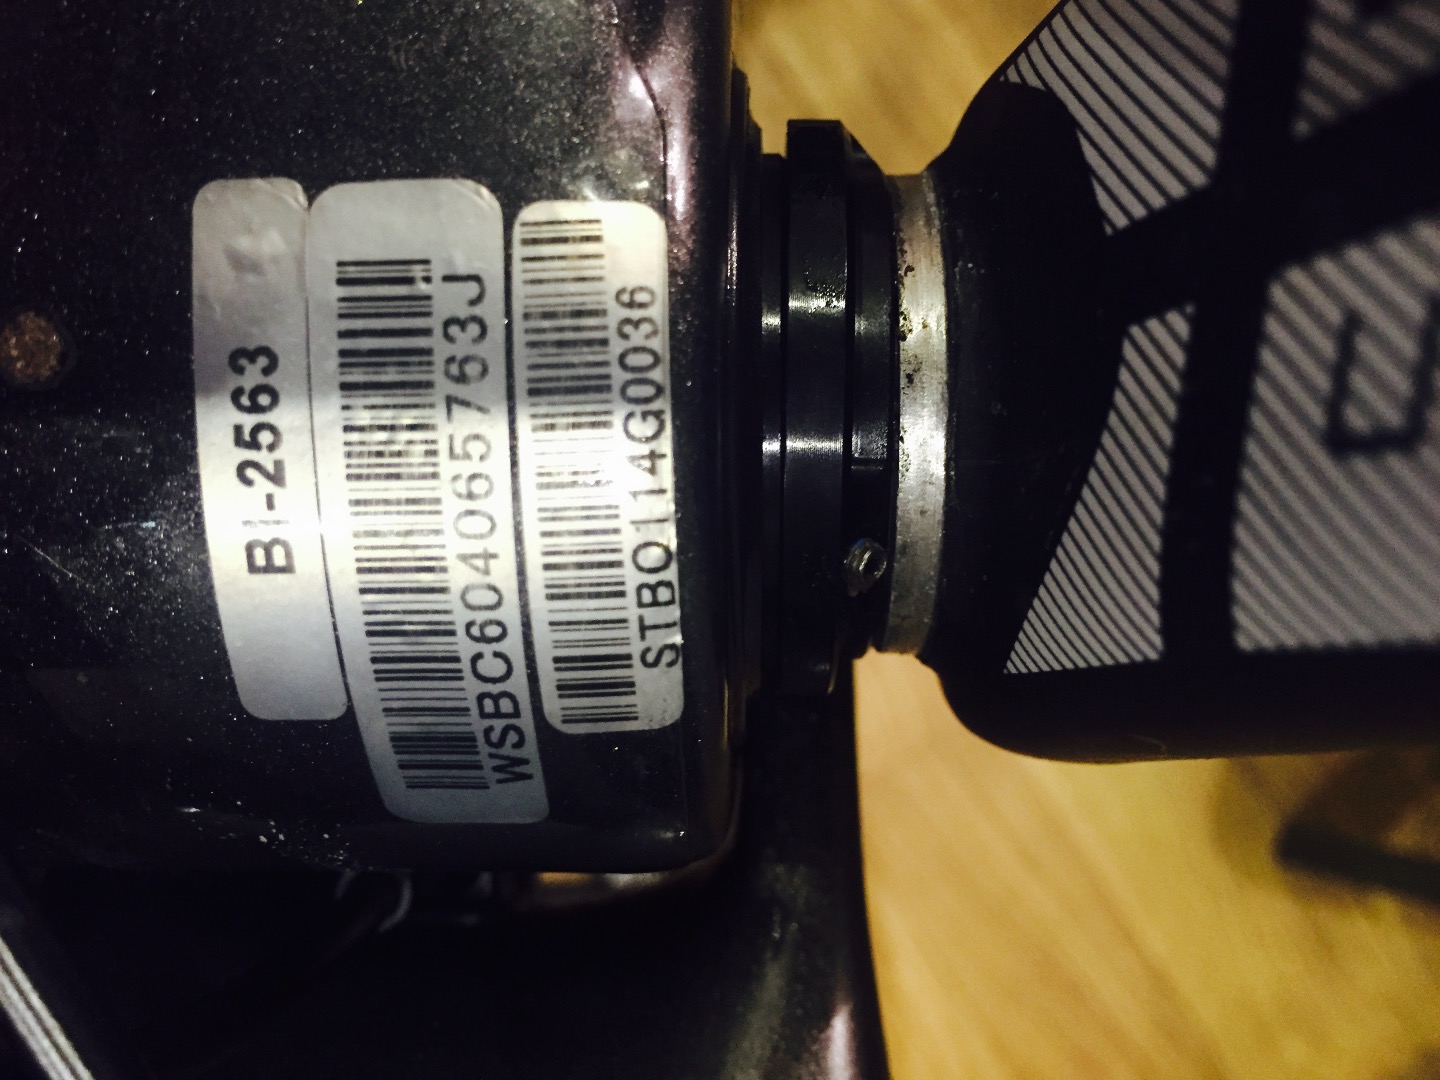 specialized model year from serial number